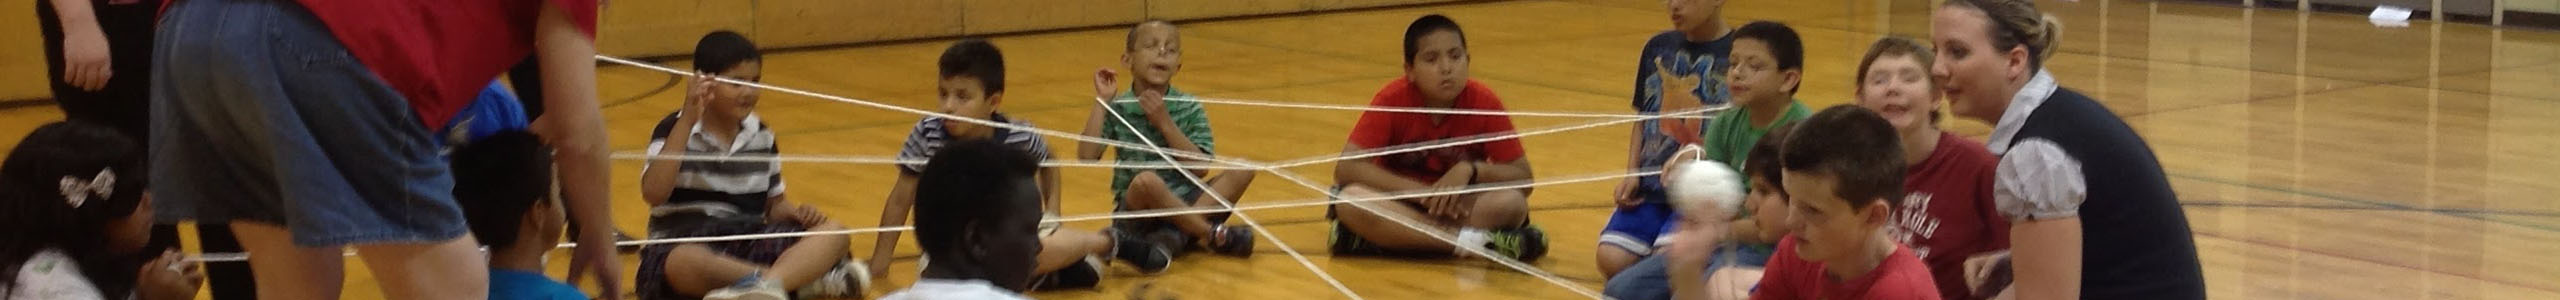 15 elementary children sit cross legged in a large circle on a wooden gymnasium floor. They are all wearing shorts and short sleeve shirts. One youth is holding a white ball. There is string being held by all students connecting them and making a spider web type pattern in the middle of the circle.